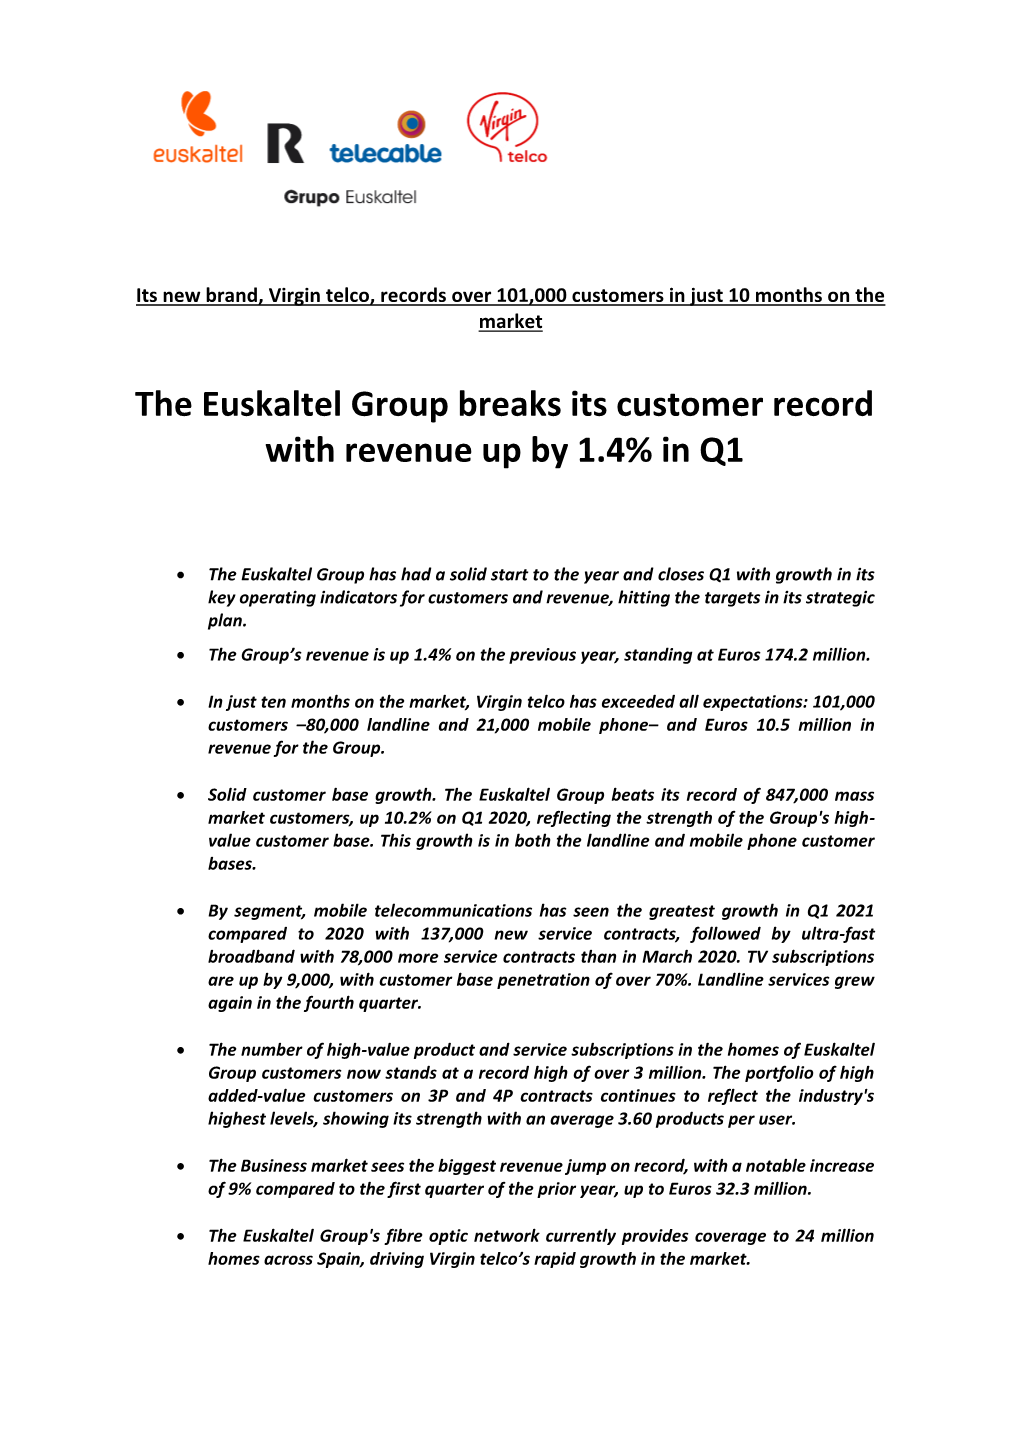 The Euskaltel Group Breaks Its Customer Record with Revenue up by 1.4% in Q1